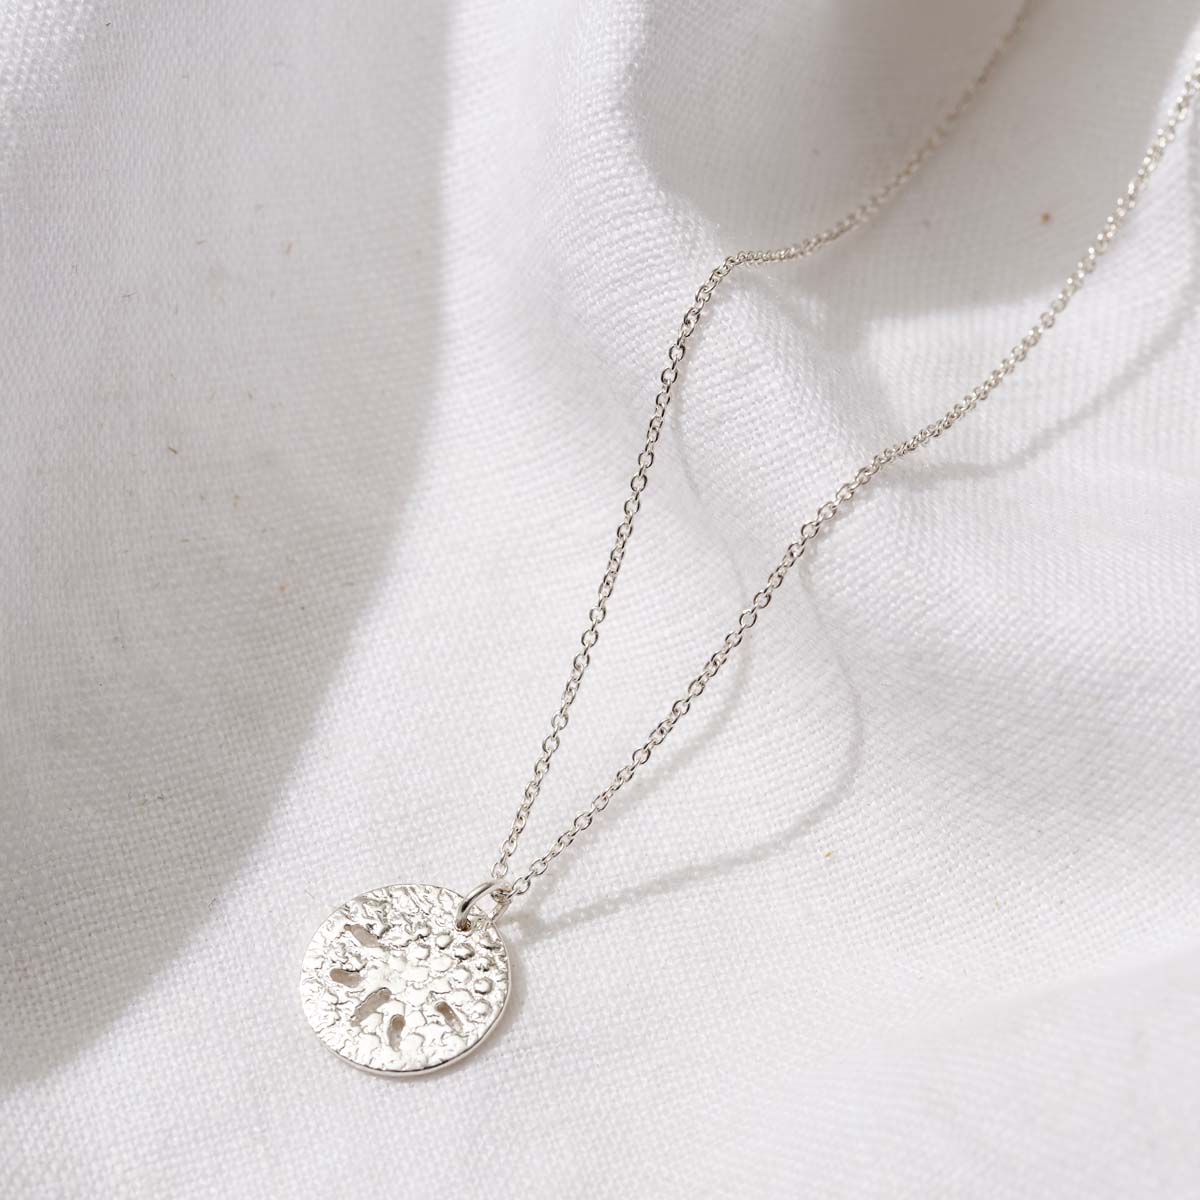 Posh Totty Designs Silver Sand Dollar Necklace